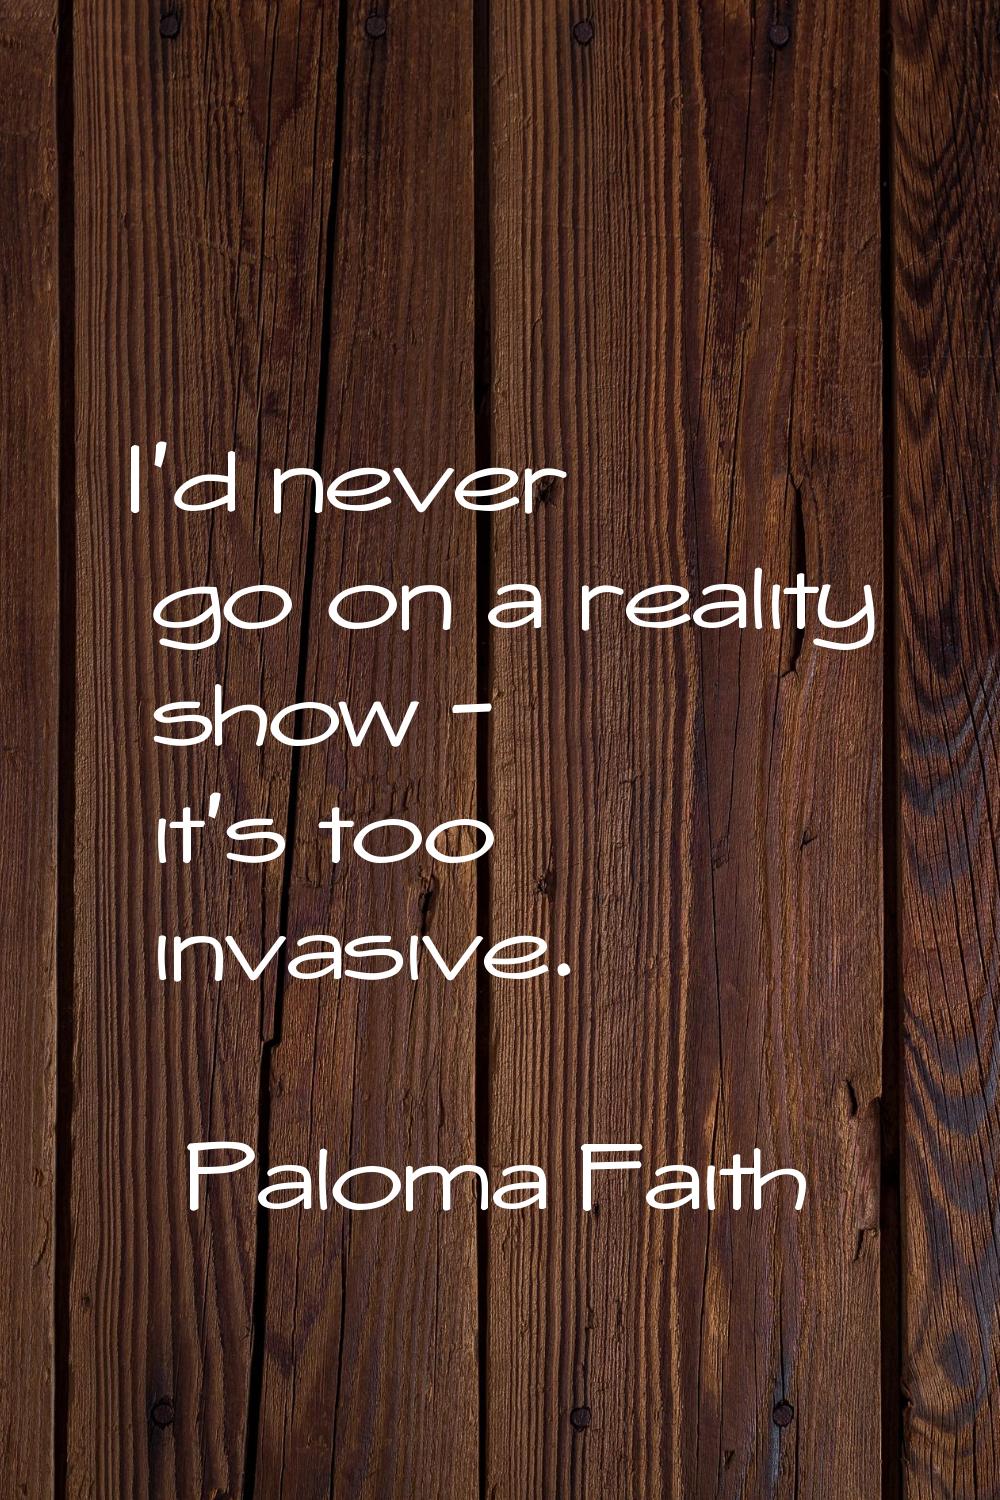 I'd never go on a reality show - it's too invasive.